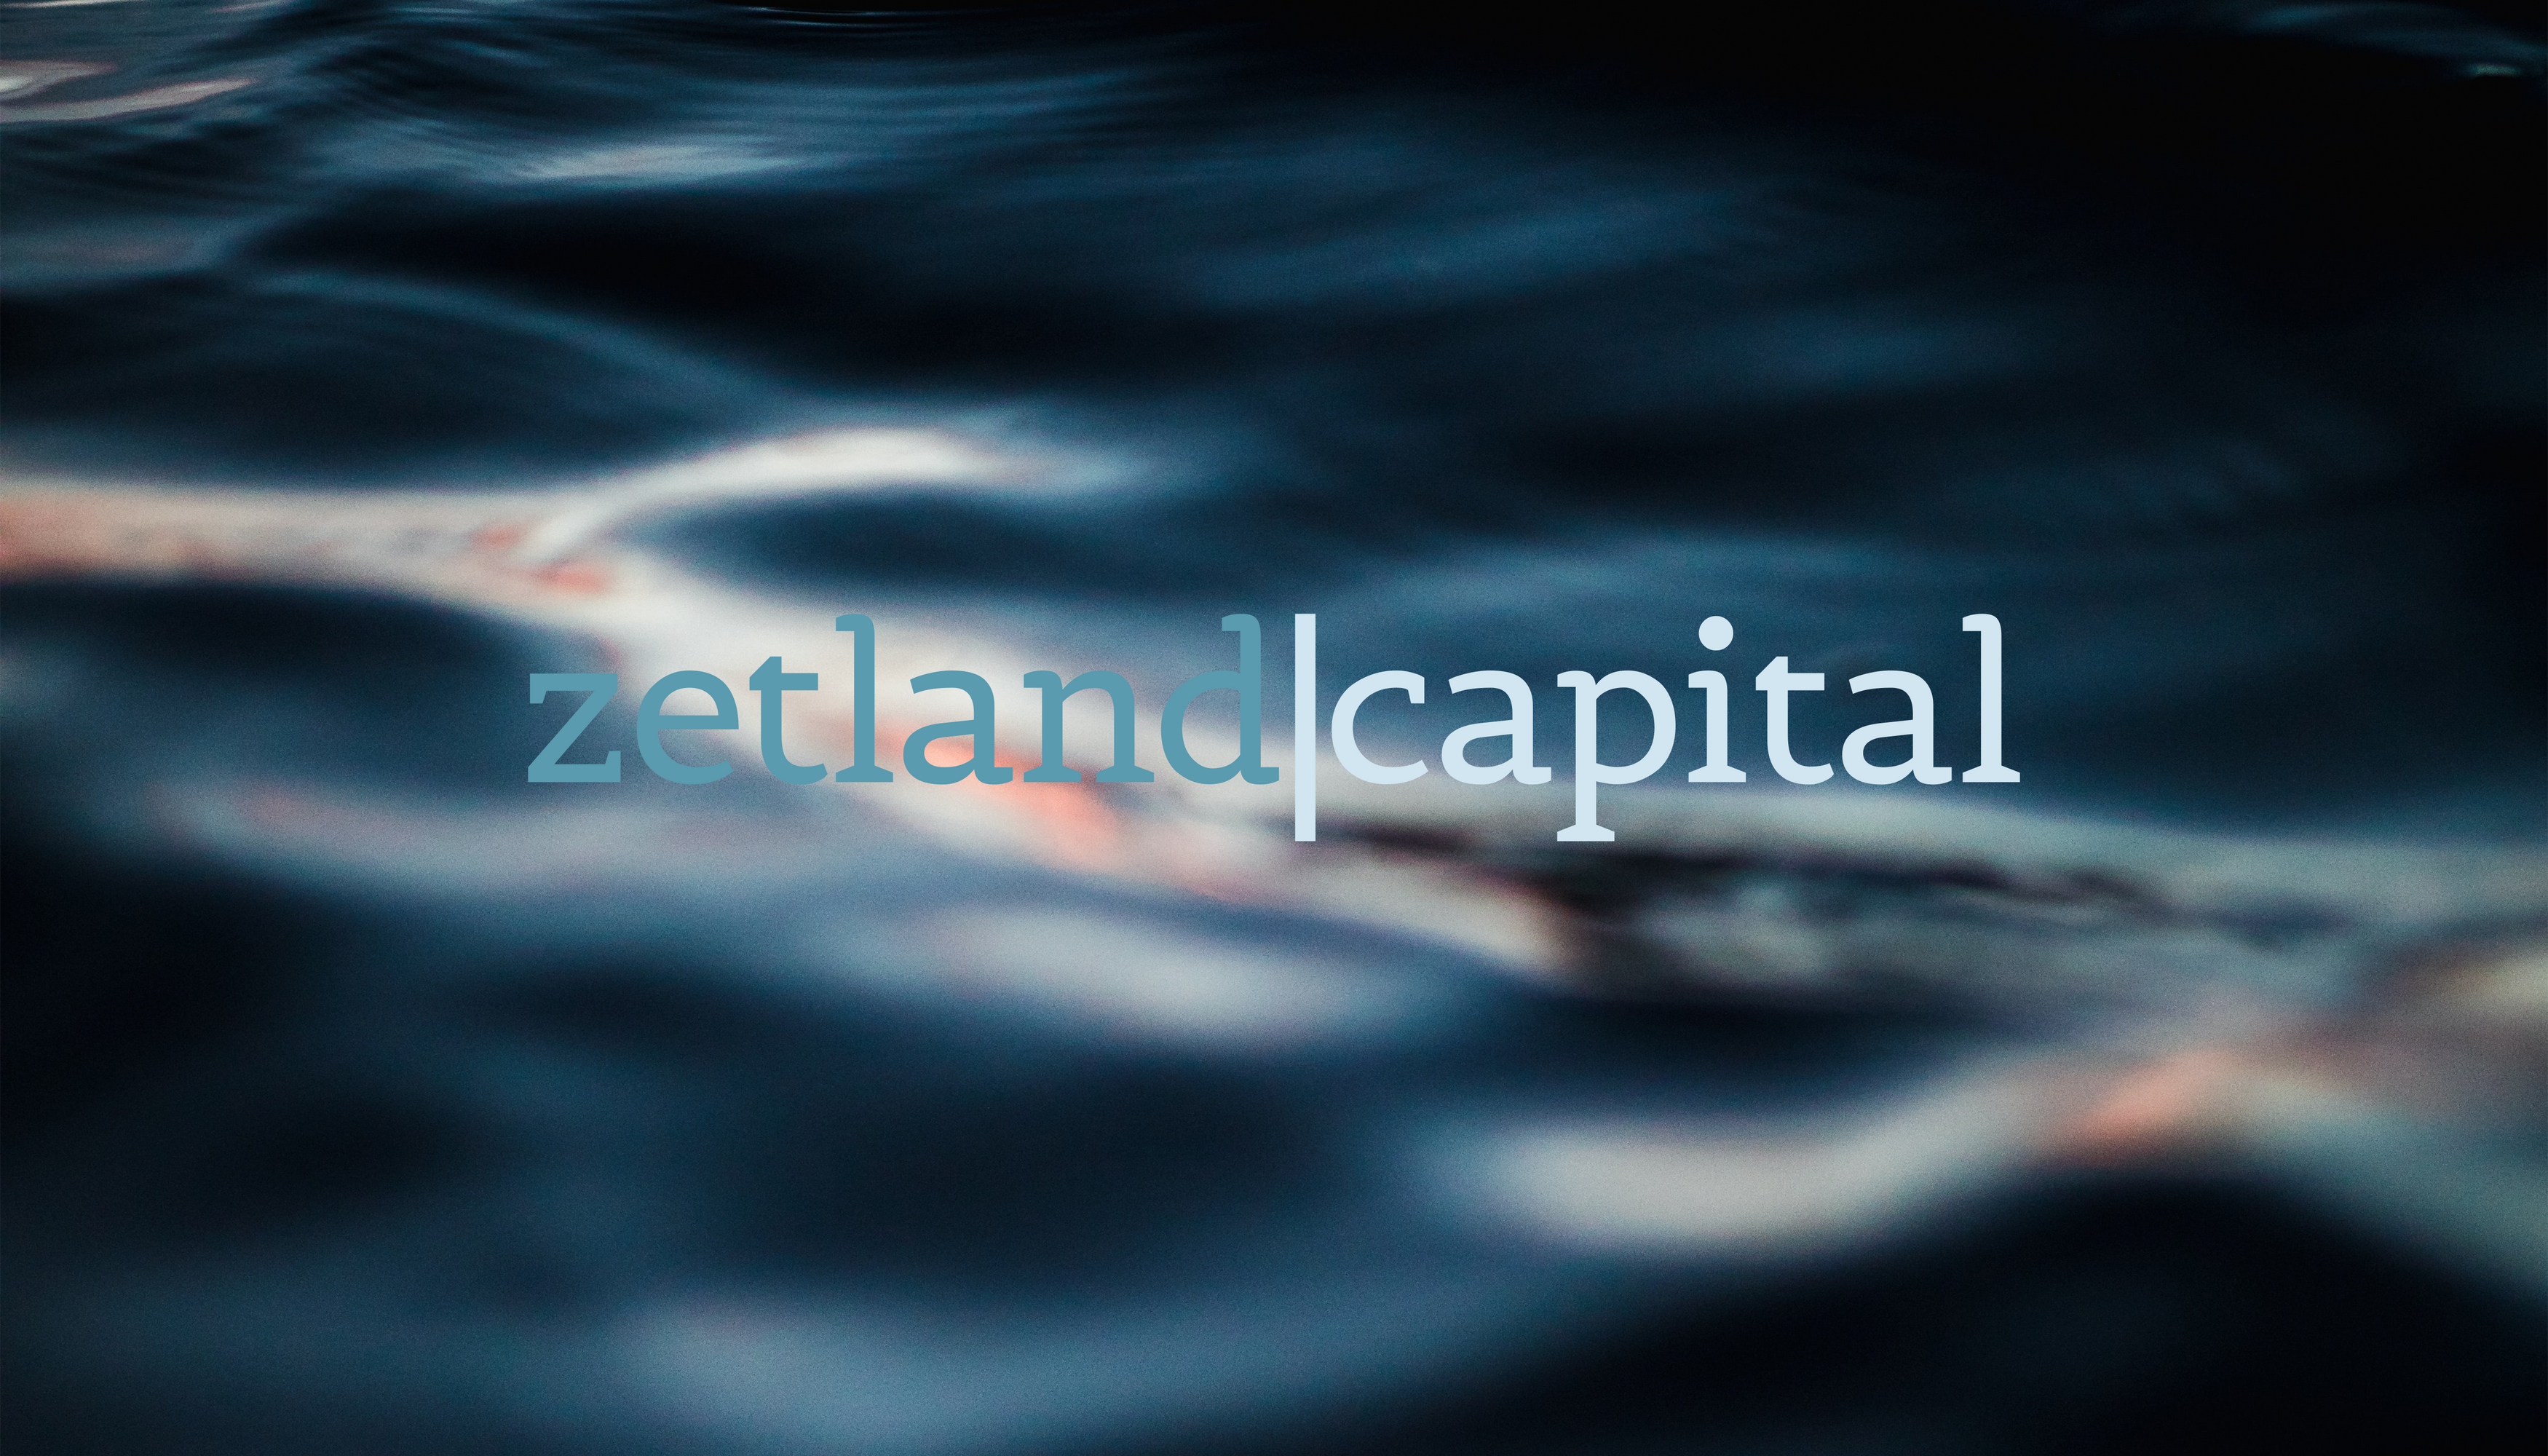 Cover image from Zetland Capital